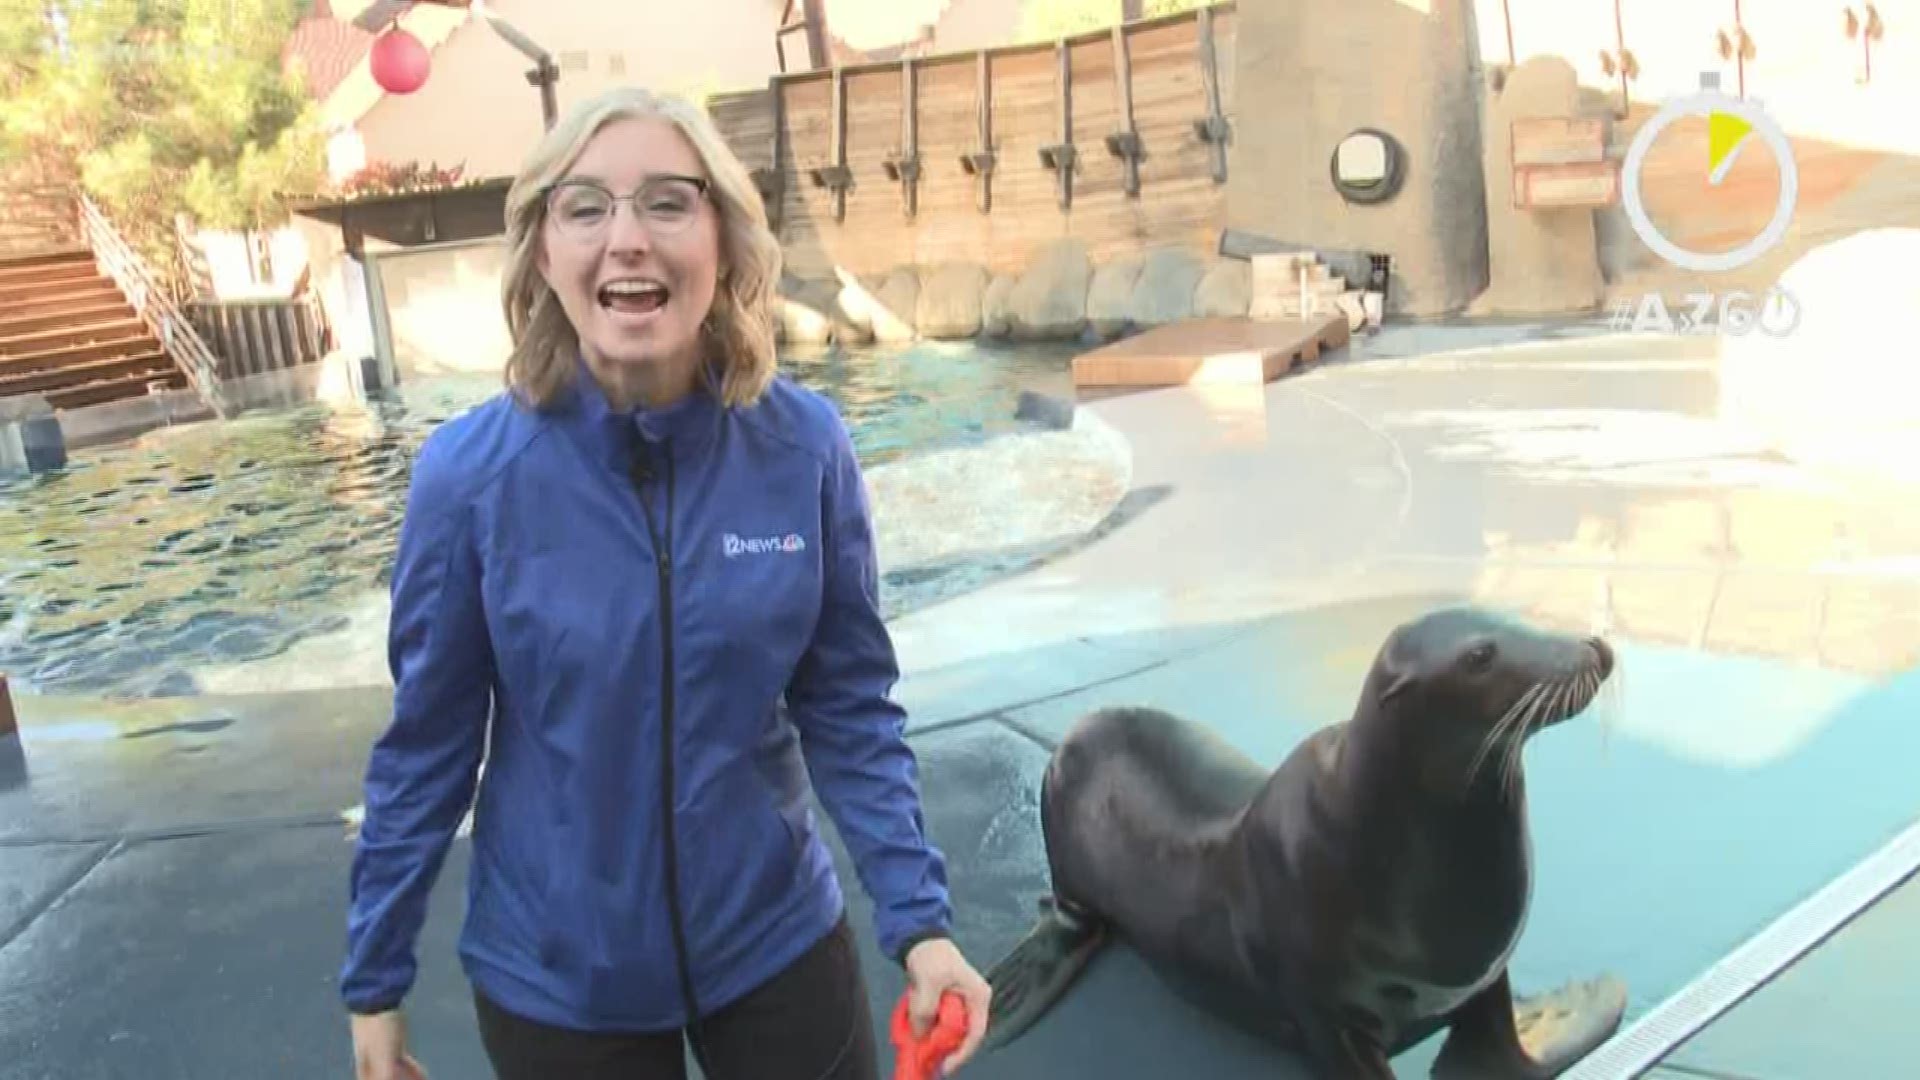 The sea lion exhibit at Wildlife World Zoo isn't just cute, it's important. Colleen Sikora has the story.